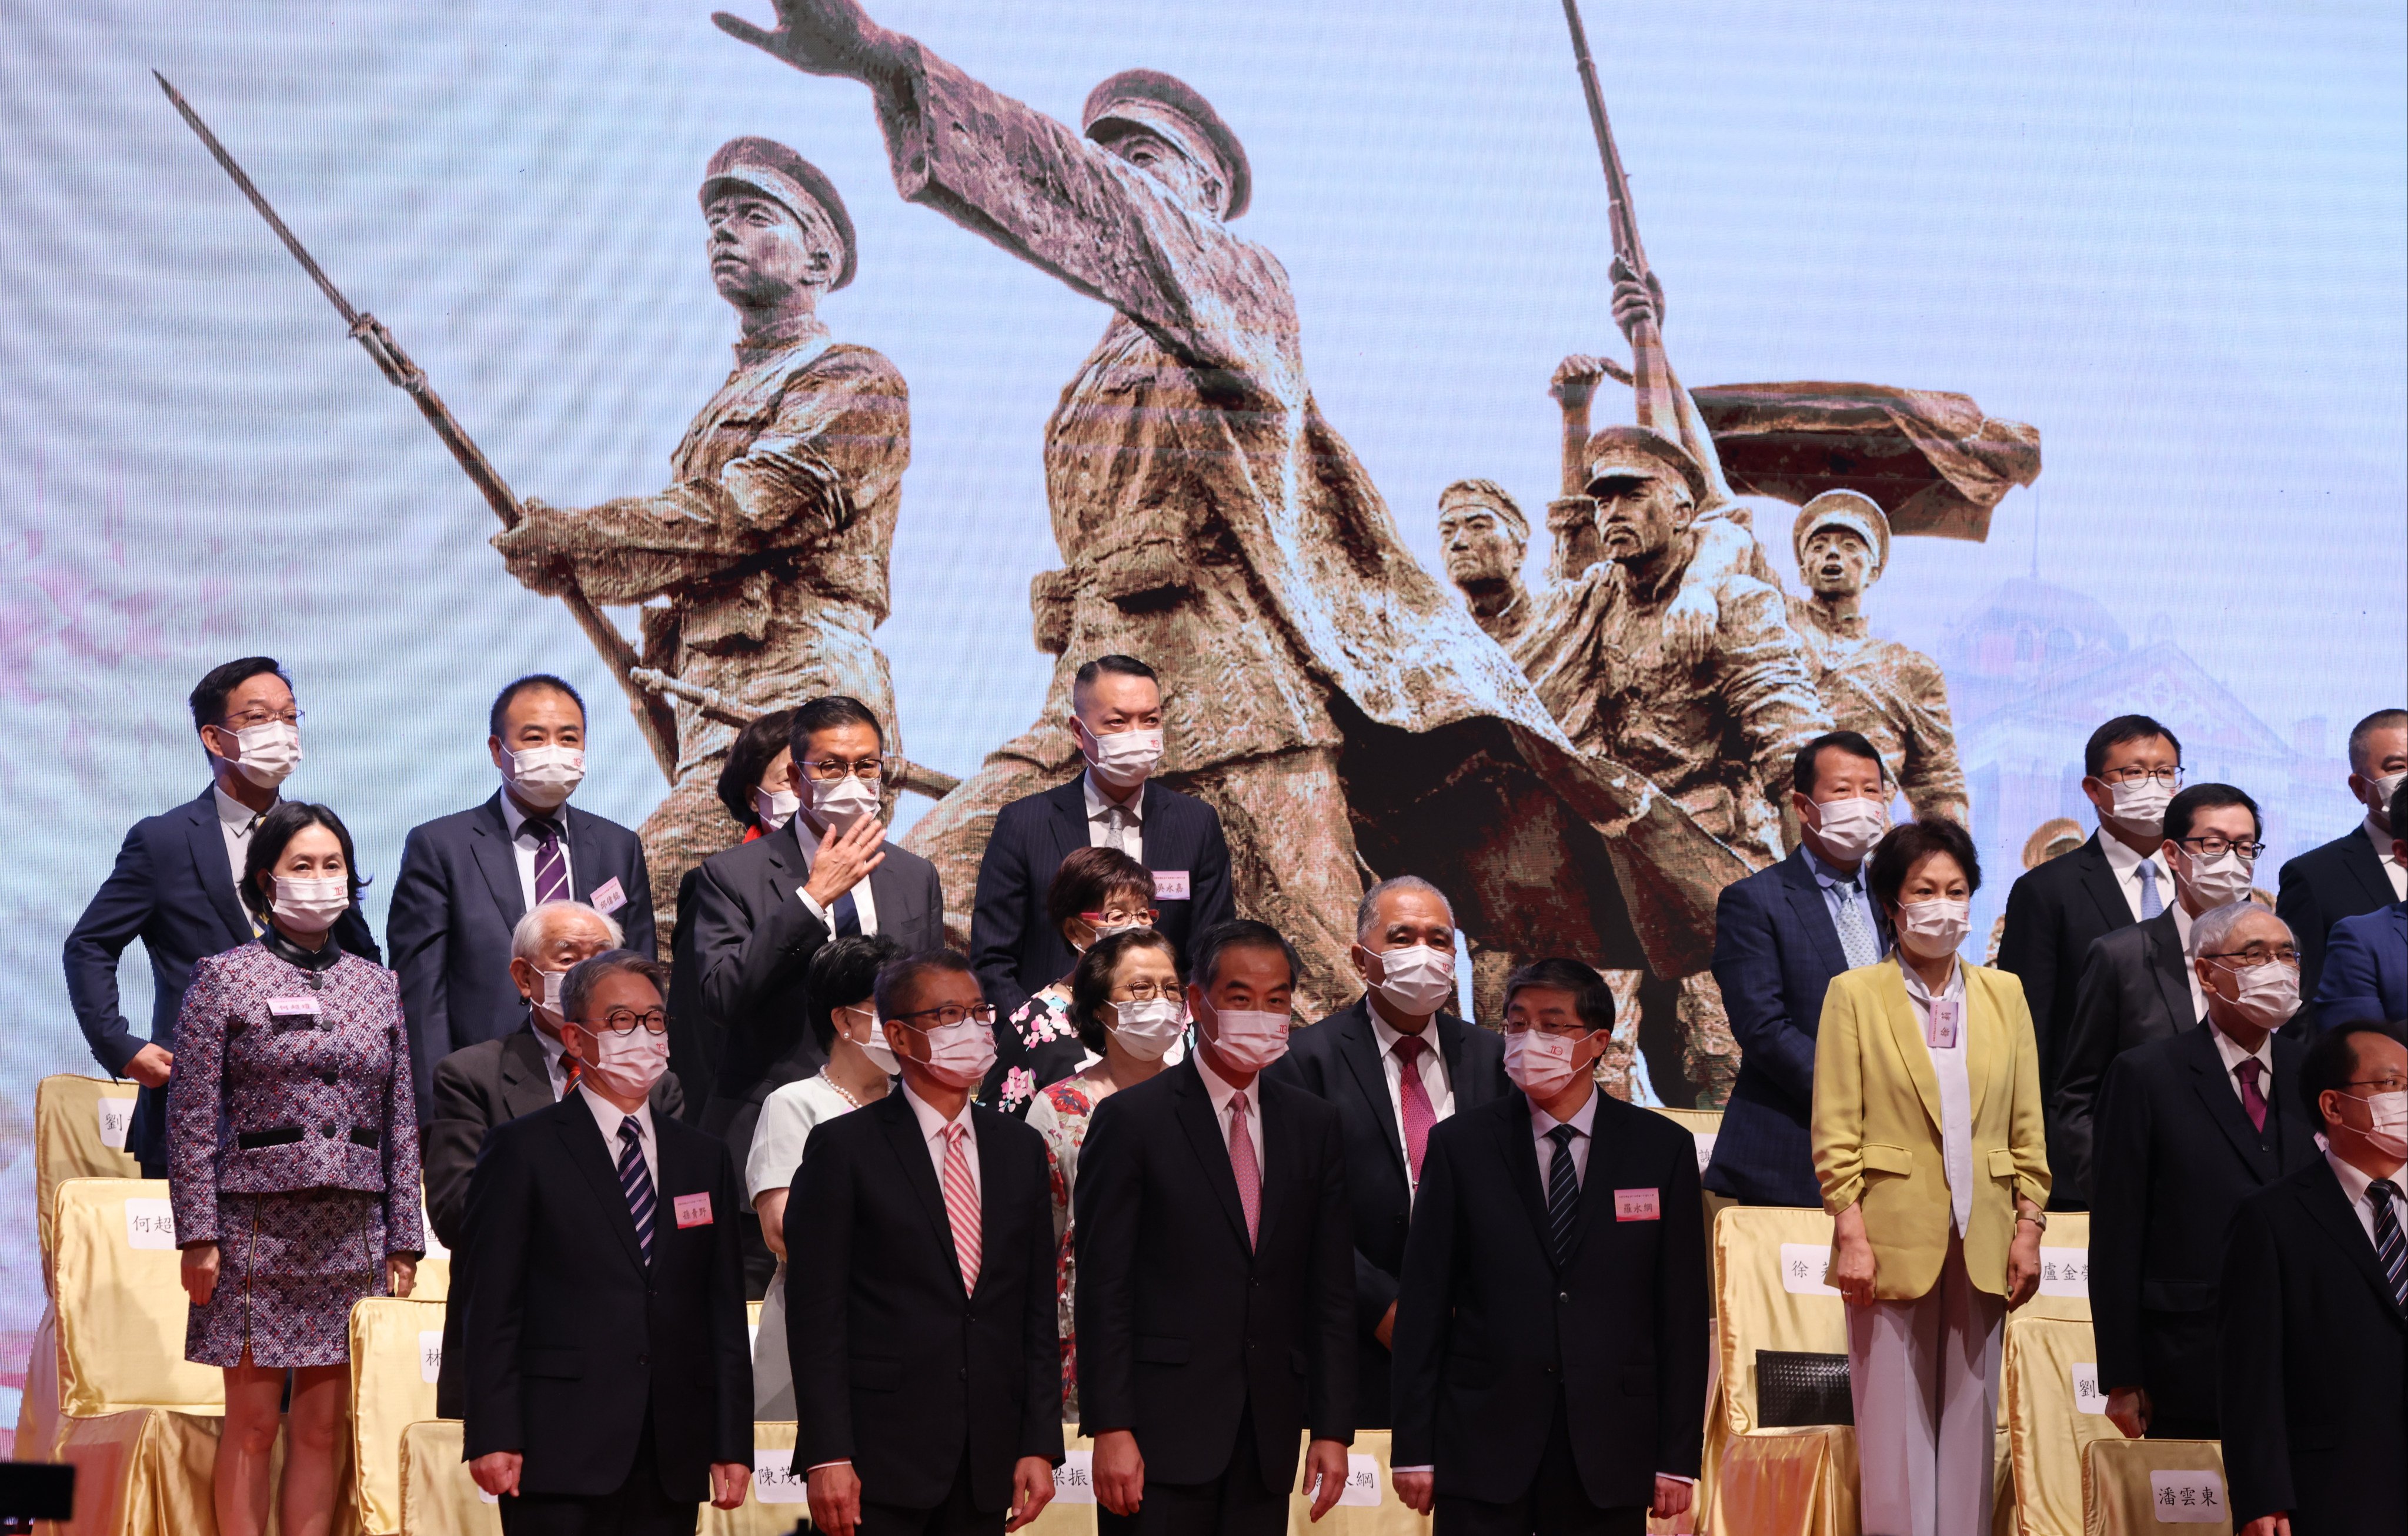 A commemorative assembly marking the 110th anniversary of the Xinhai Revolution is held at the Hong Kong Convention and Exhibition Centre in Wan Chai on September 23, 2021. Hong Kong’s continued prosperity depends on our leaders understanding China’s political psyche. Photo: Nora Tam